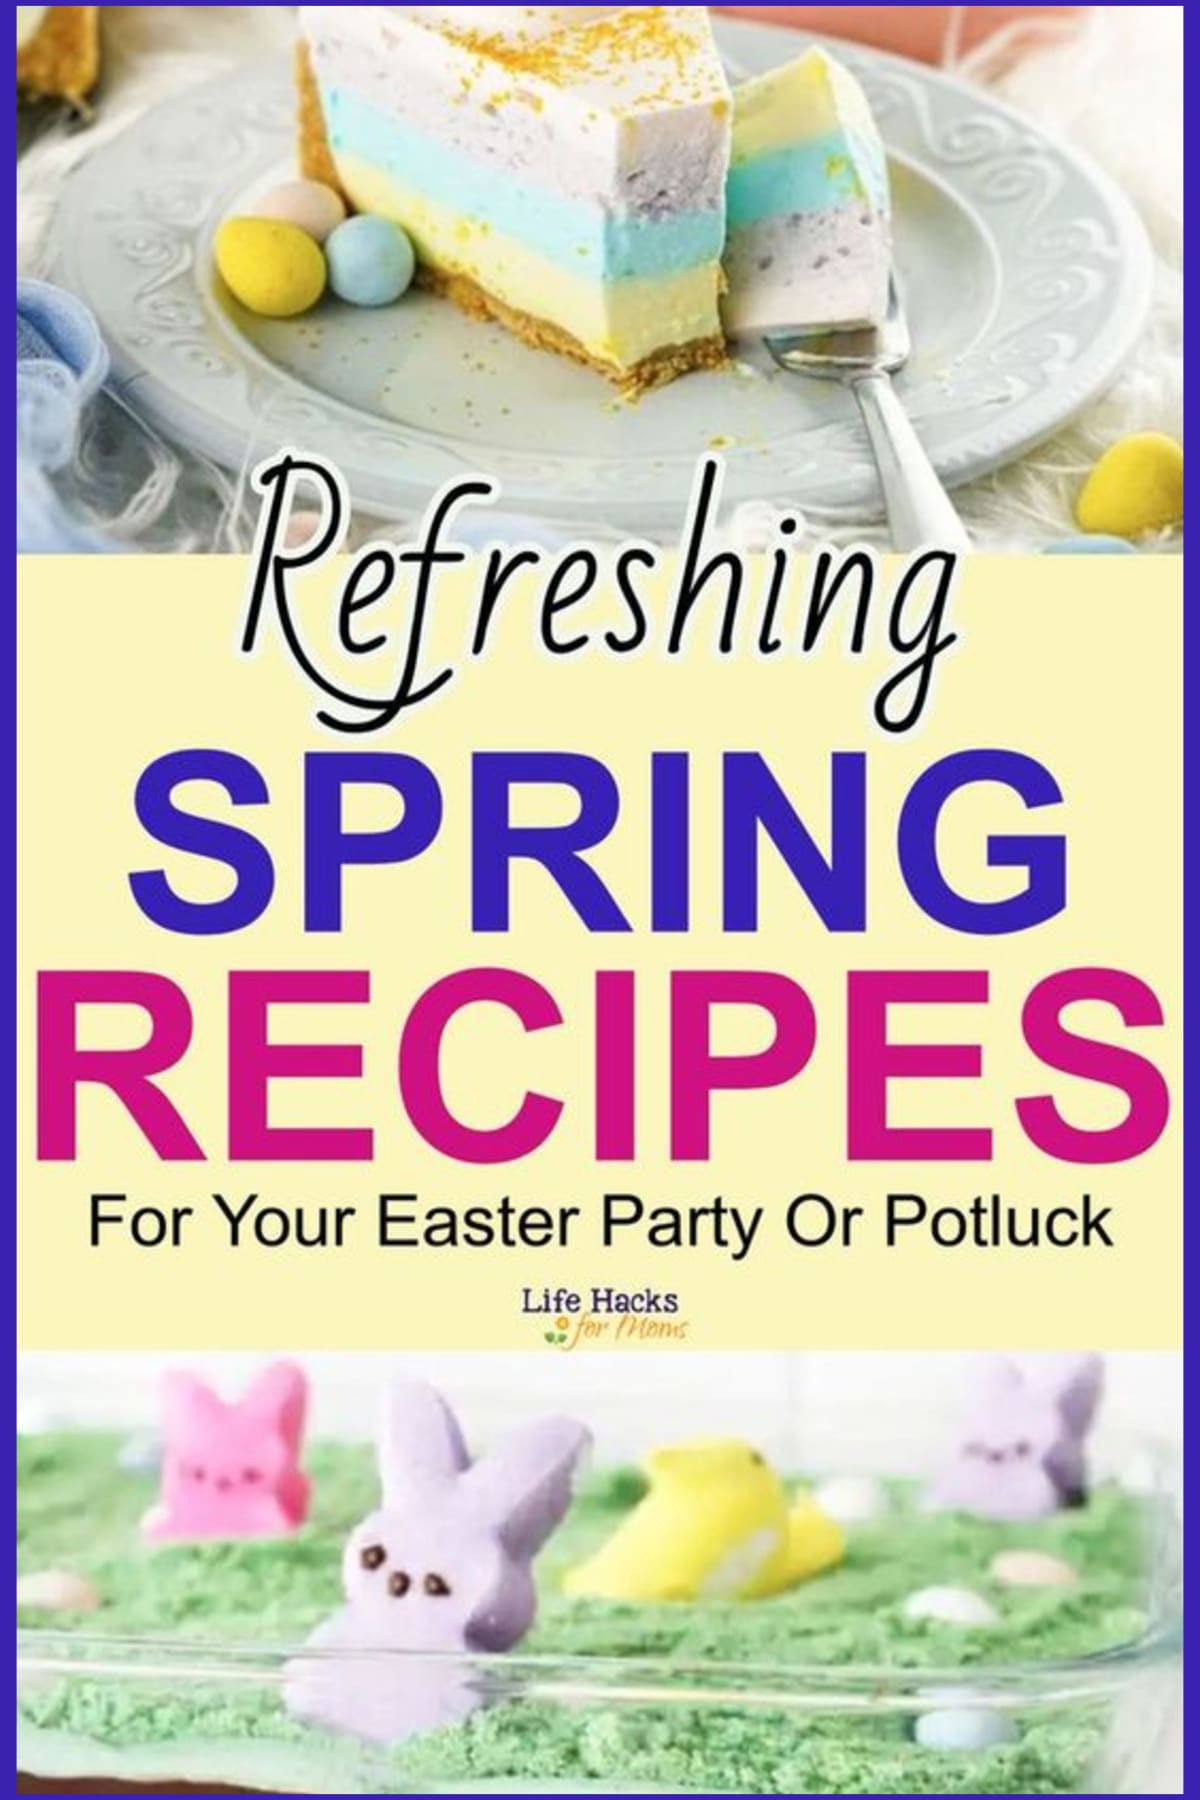 Refreshing Spring Dessert Recipes For Your Easter Potluck or Party